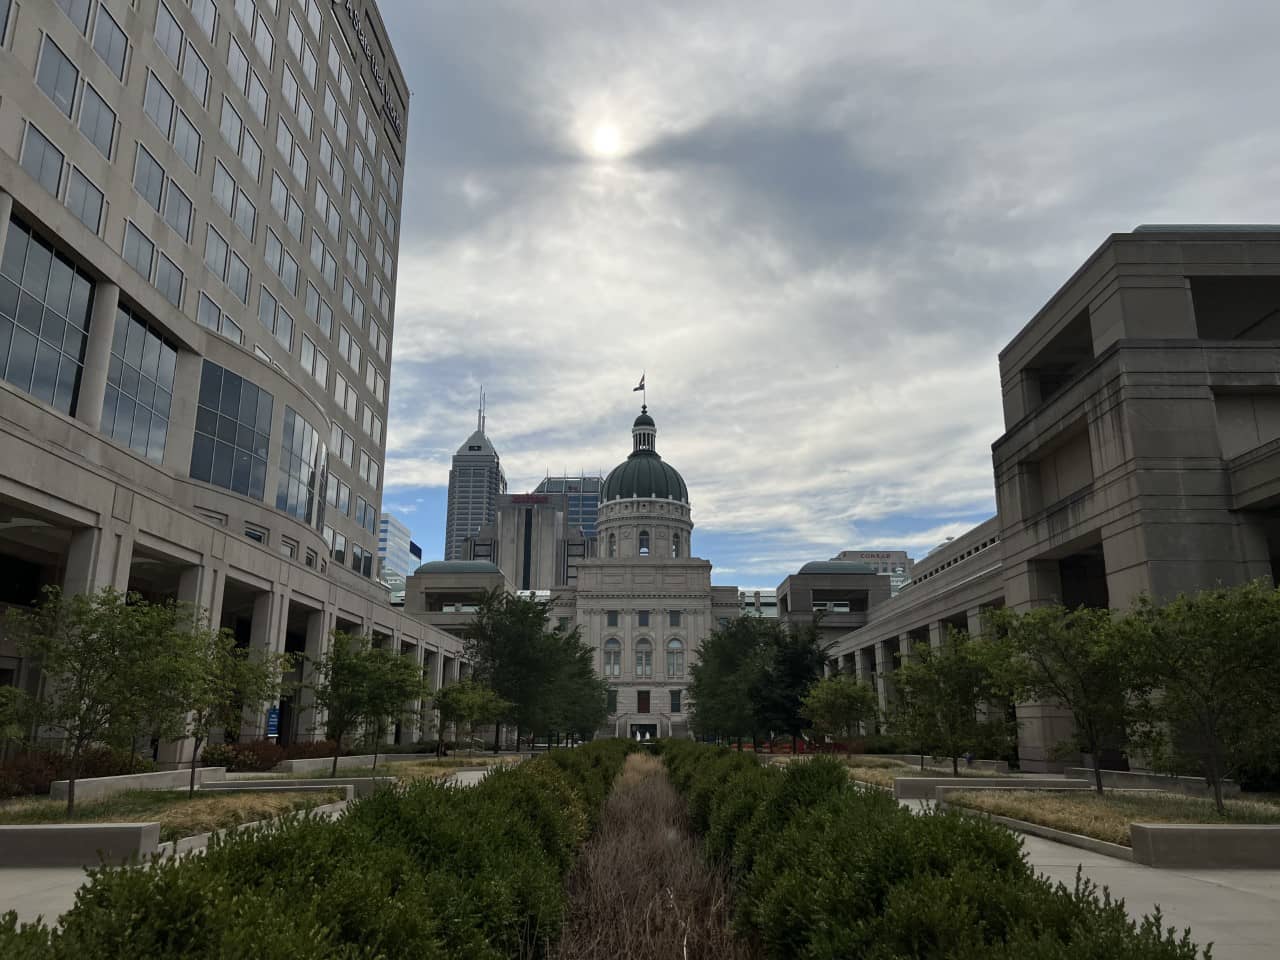 Landscape photo of Indiana's Statehouse, with each government center on opposing sides.